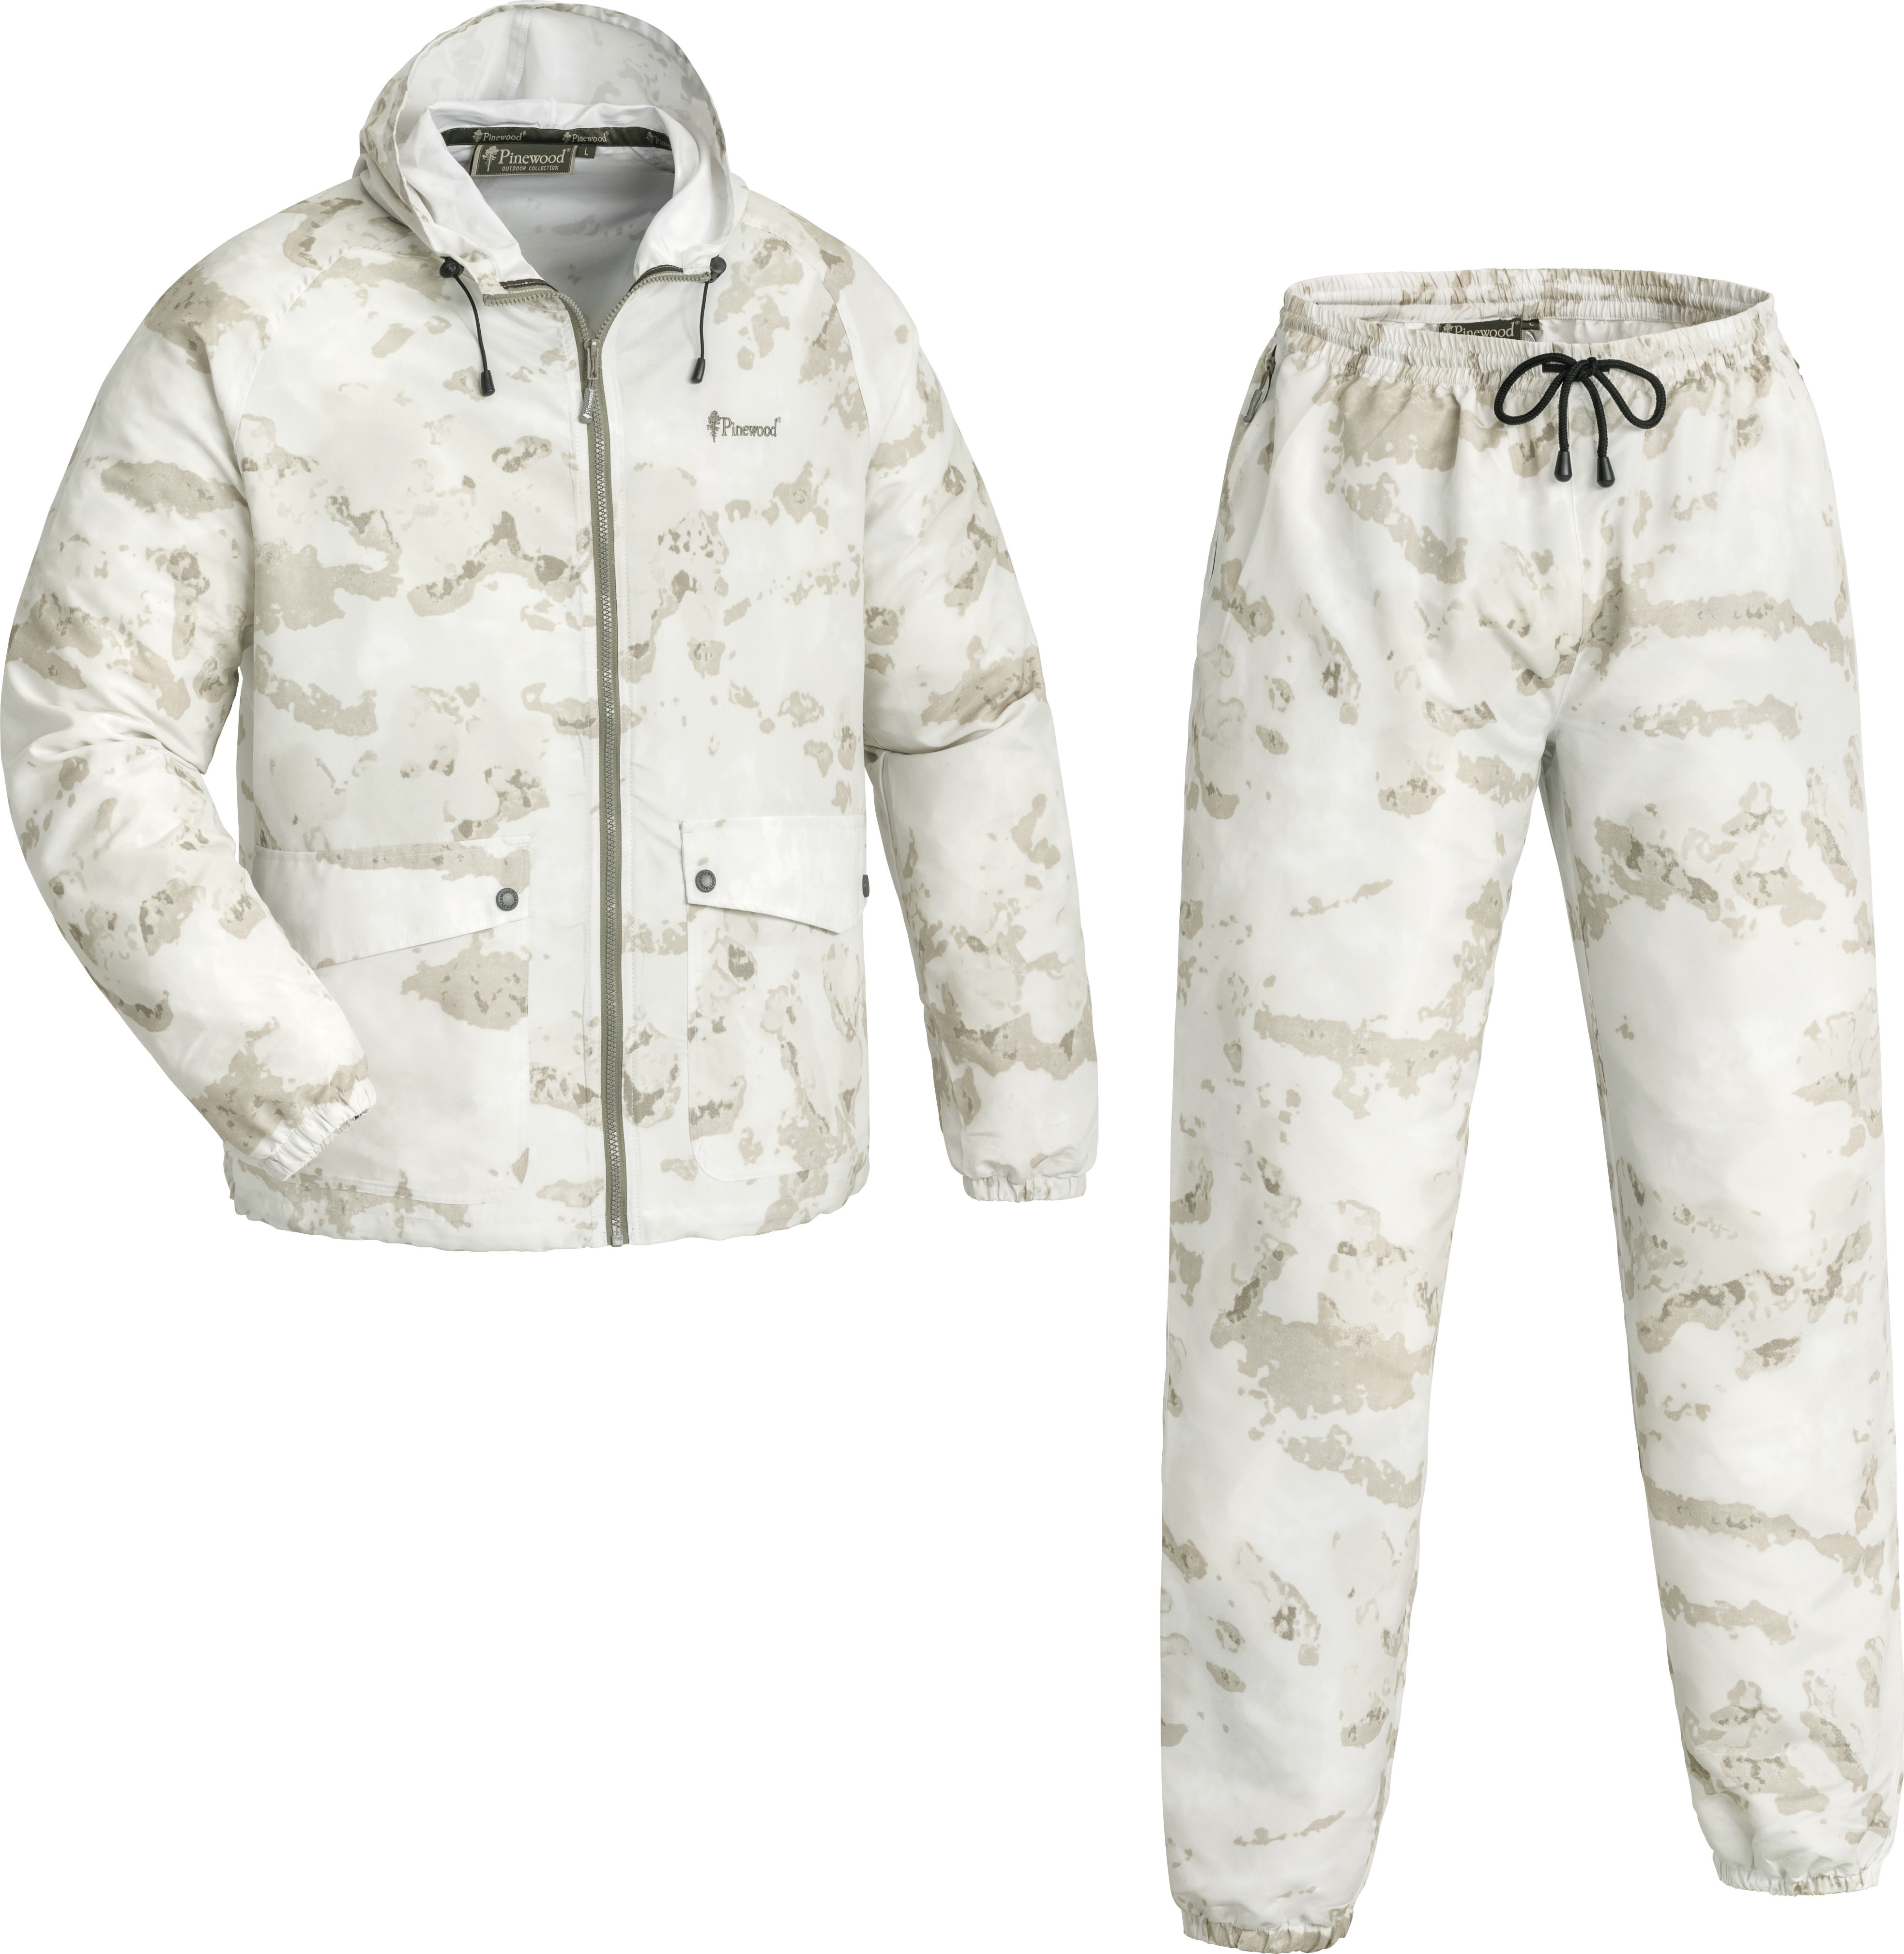 Pinewood Men’s Camou Cover Set Snow Camou